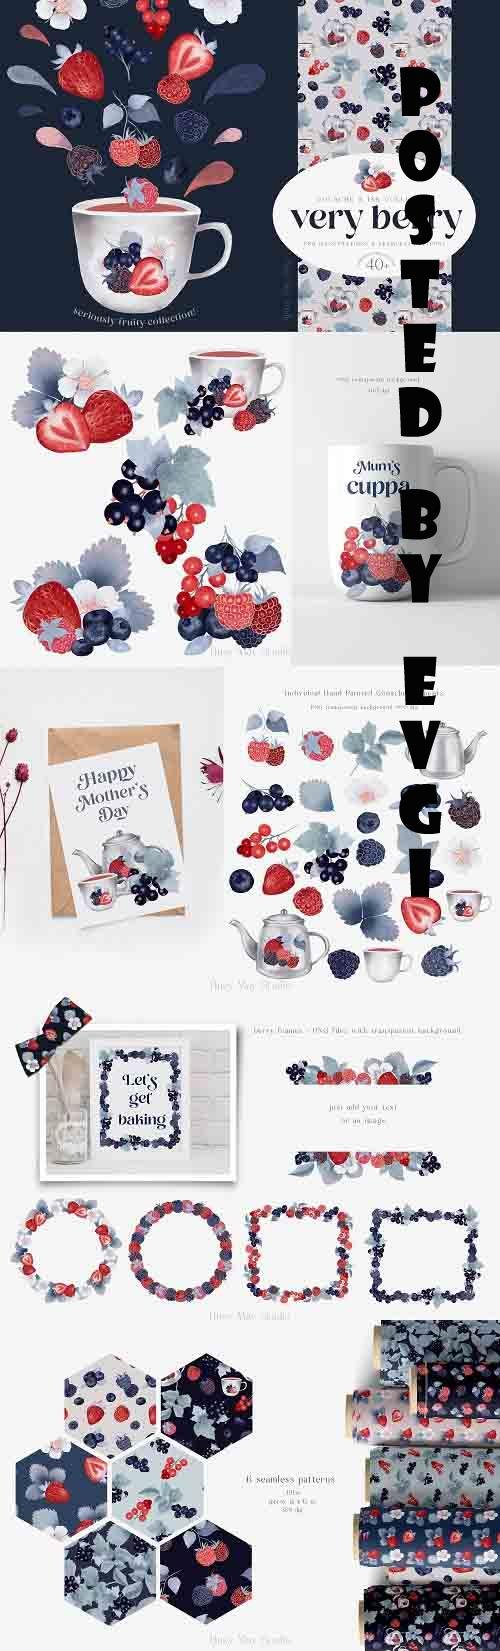 Gouache Berries Illustrations and Seamless Patterns PNG JPEG - 1360042